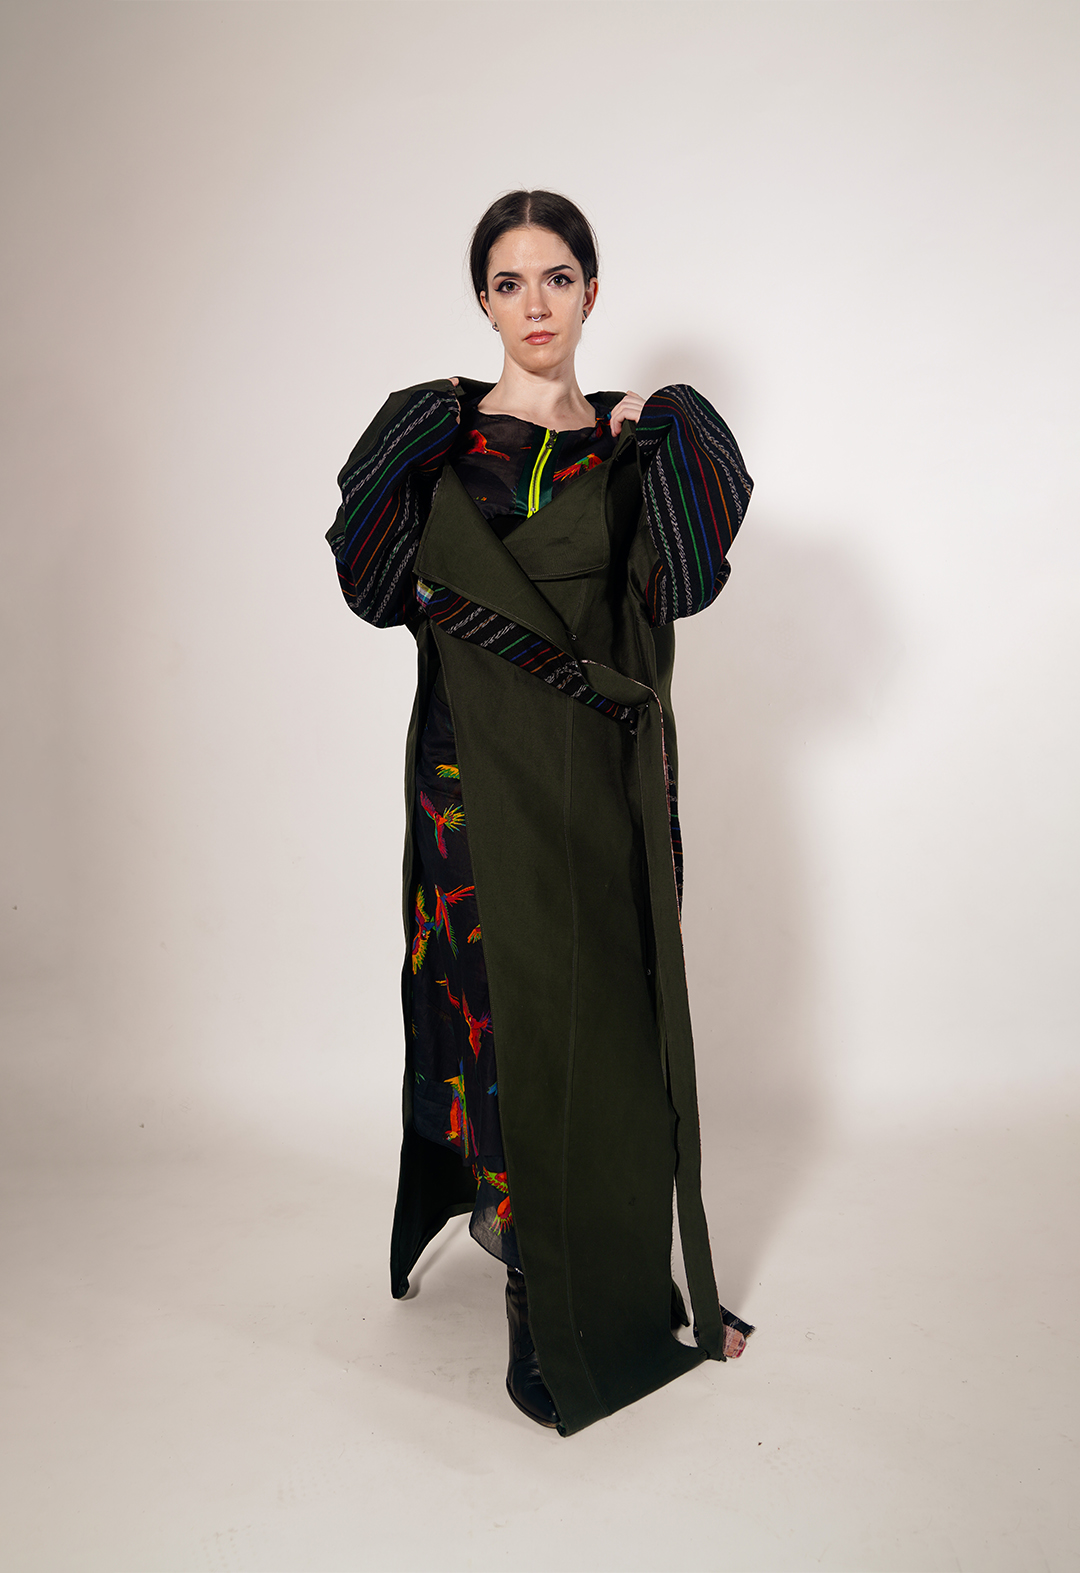 Front view of a colorful artisanal Mayan textile deconstructed trench and matching skirt in army-green silk wool. I draw from the vibrant textiles of Guatemala to create pieces that represent the strength and cultural identity of the Mayan people amid the dissolution of their homelands.